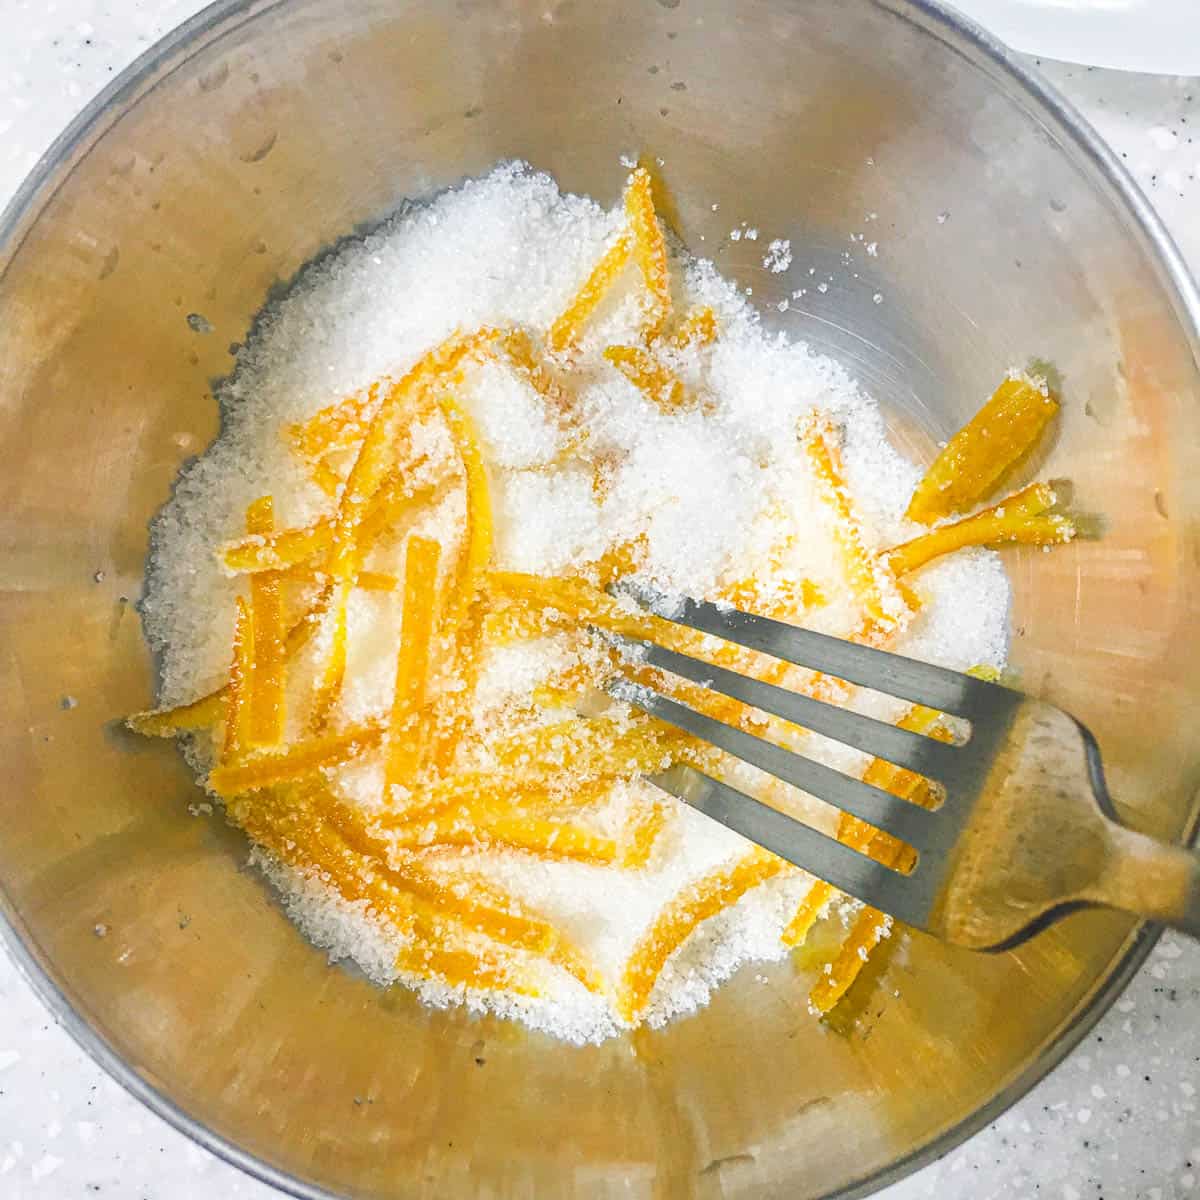 Using a fork to mix orange peel slices in a bowl of sugar.